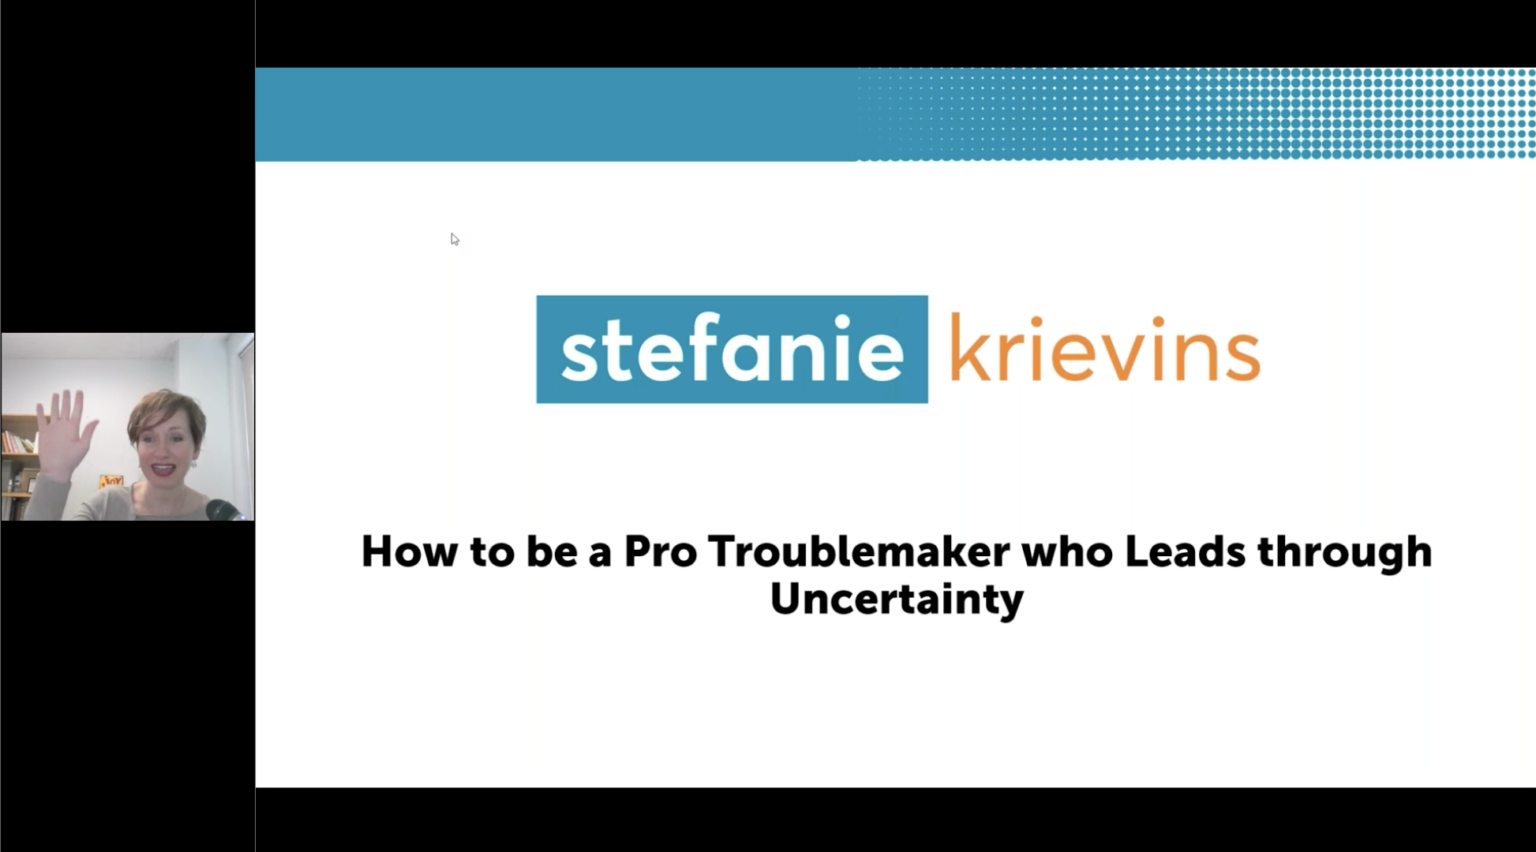 How to be a Pro Troublemaker who Leads through Uncertainty